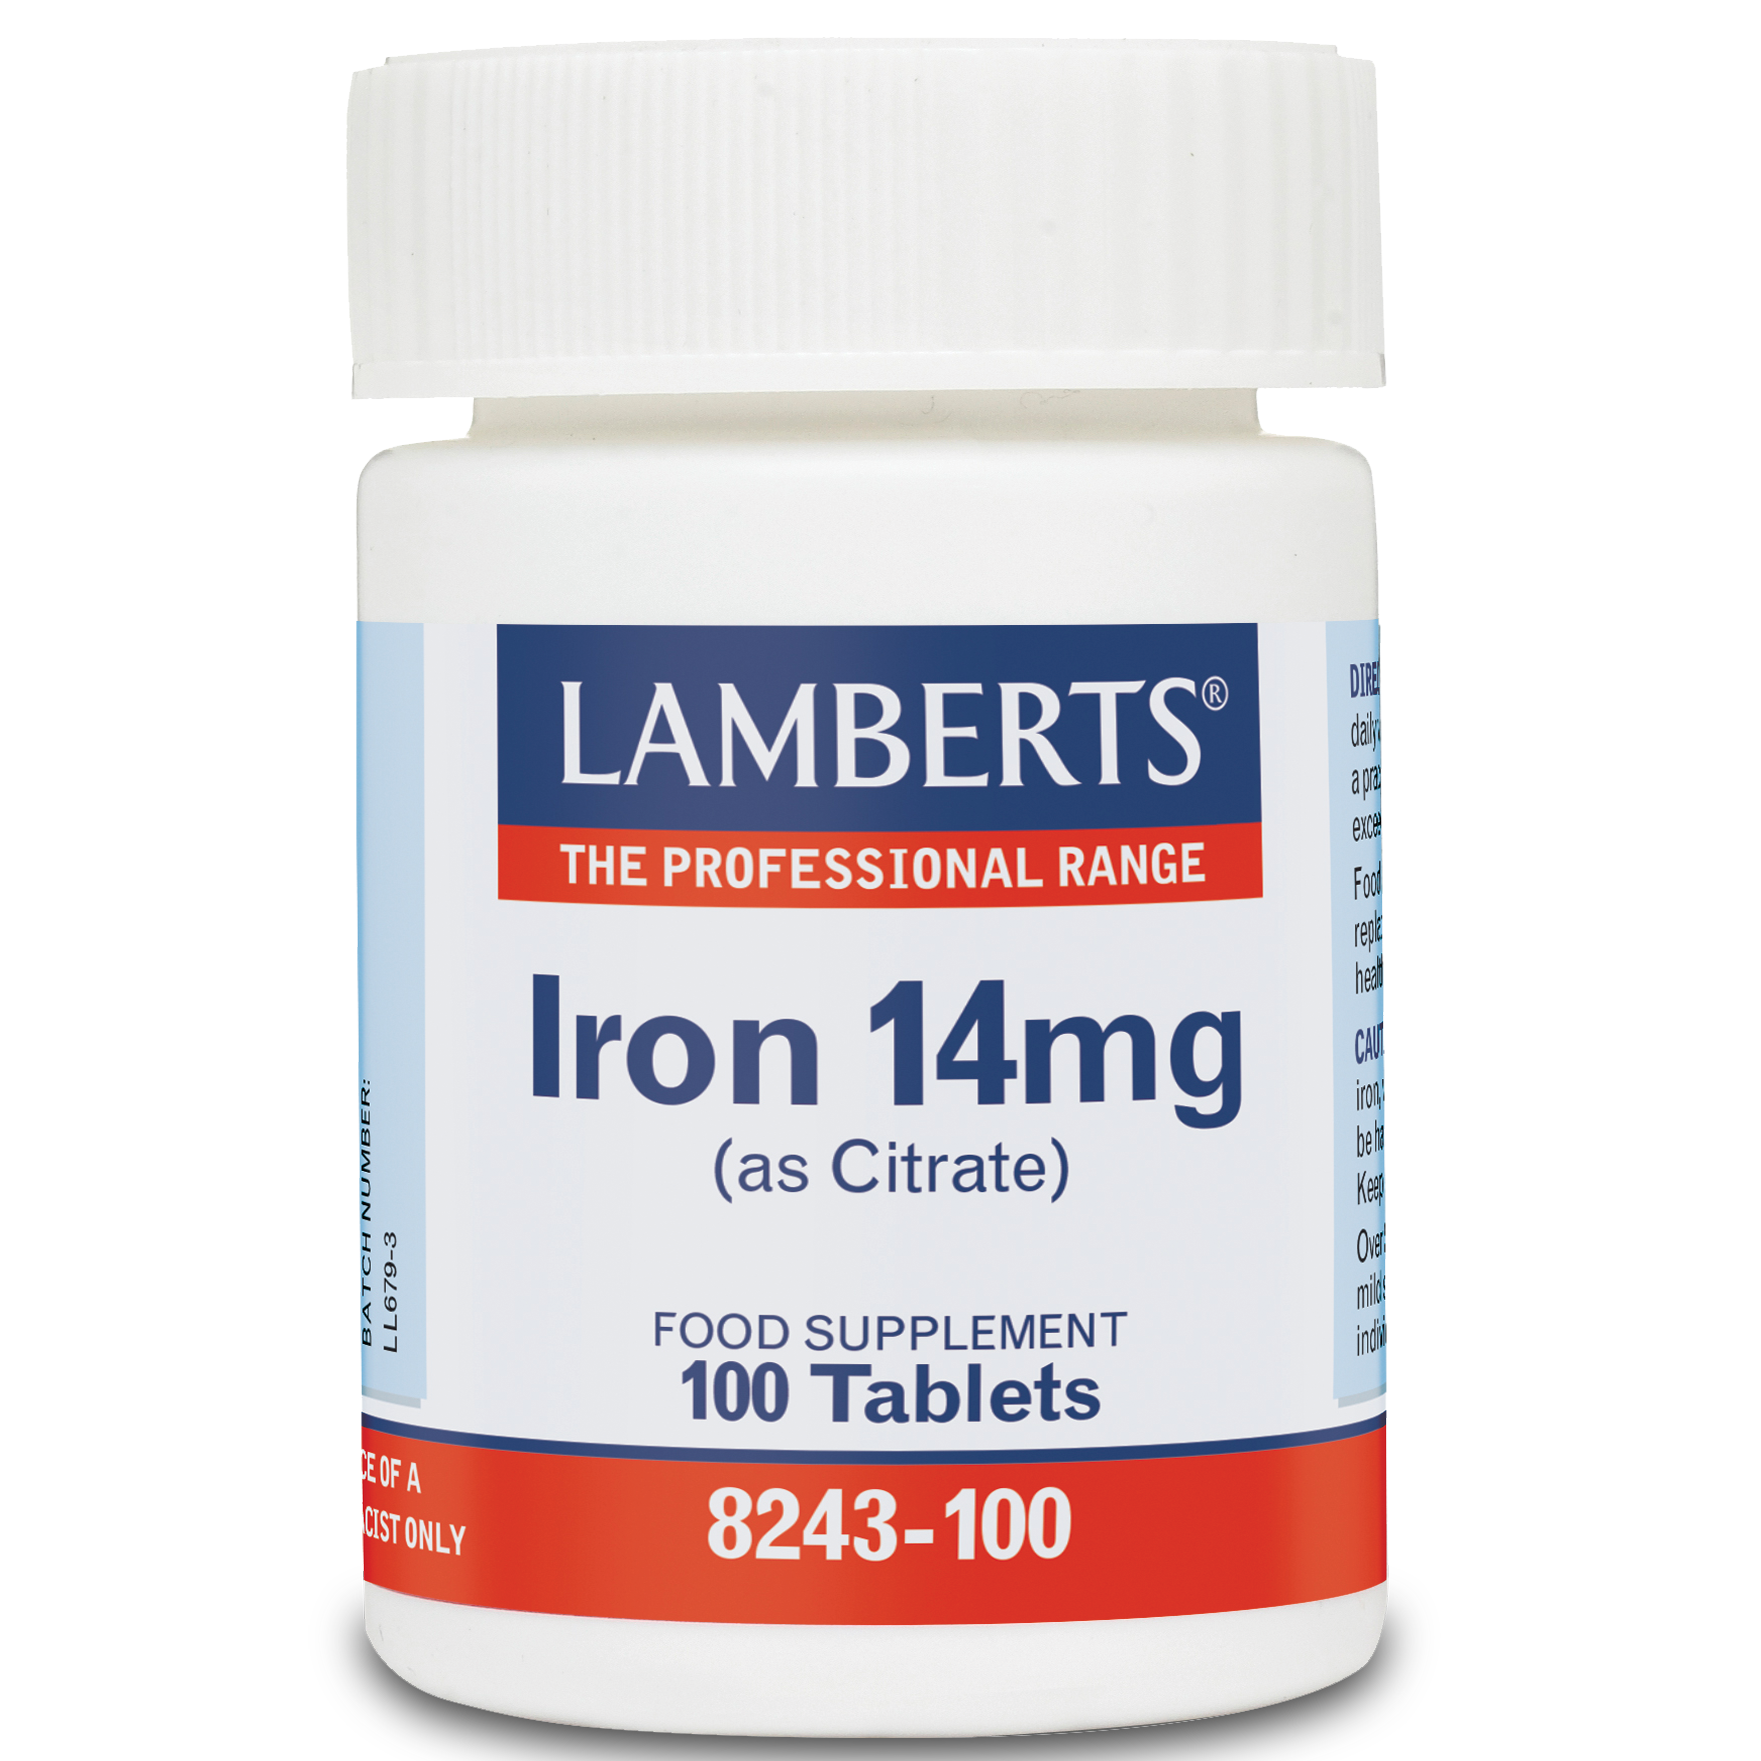 Lamberts Iron 14mg (as Citrate) Σίδηρος Σε Μορφή Citrate 100 tabs